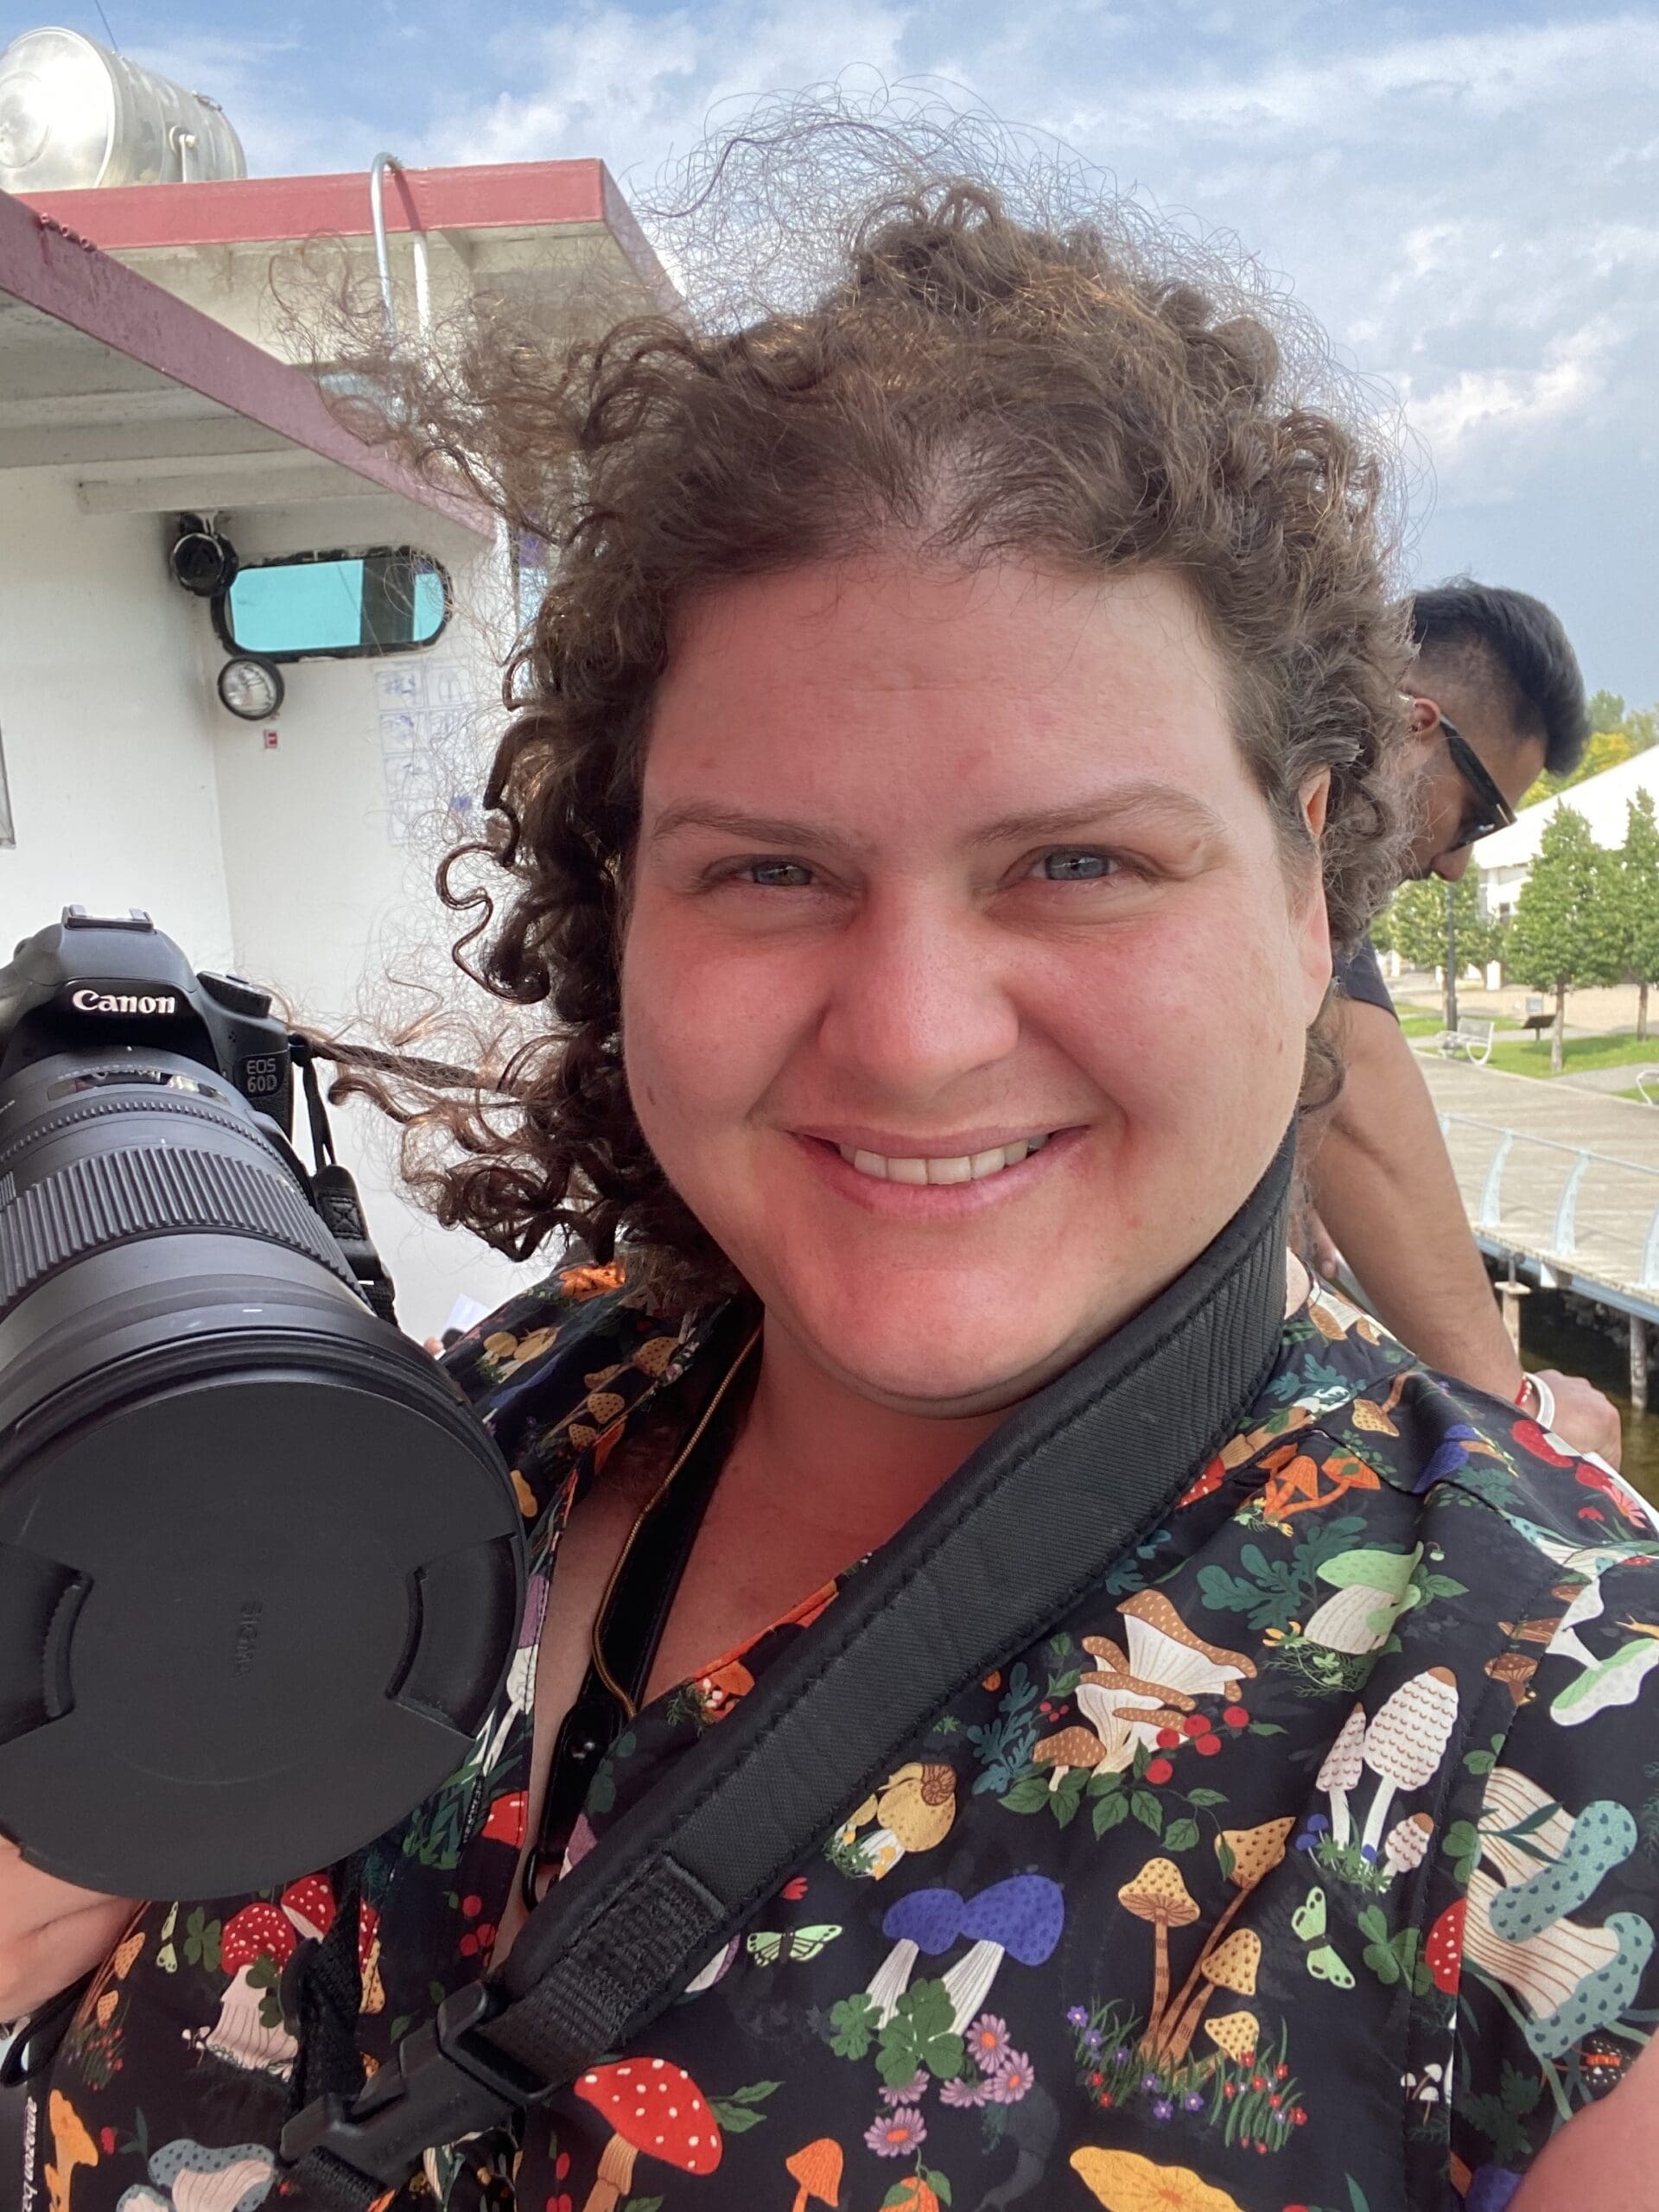 QuirkNSpite's creator Cassandra, the curls behind the camera, posing with her camera, lens on, in a quirky dress and a mischievous smile, she fully embraces the Quirky Lifestyle.